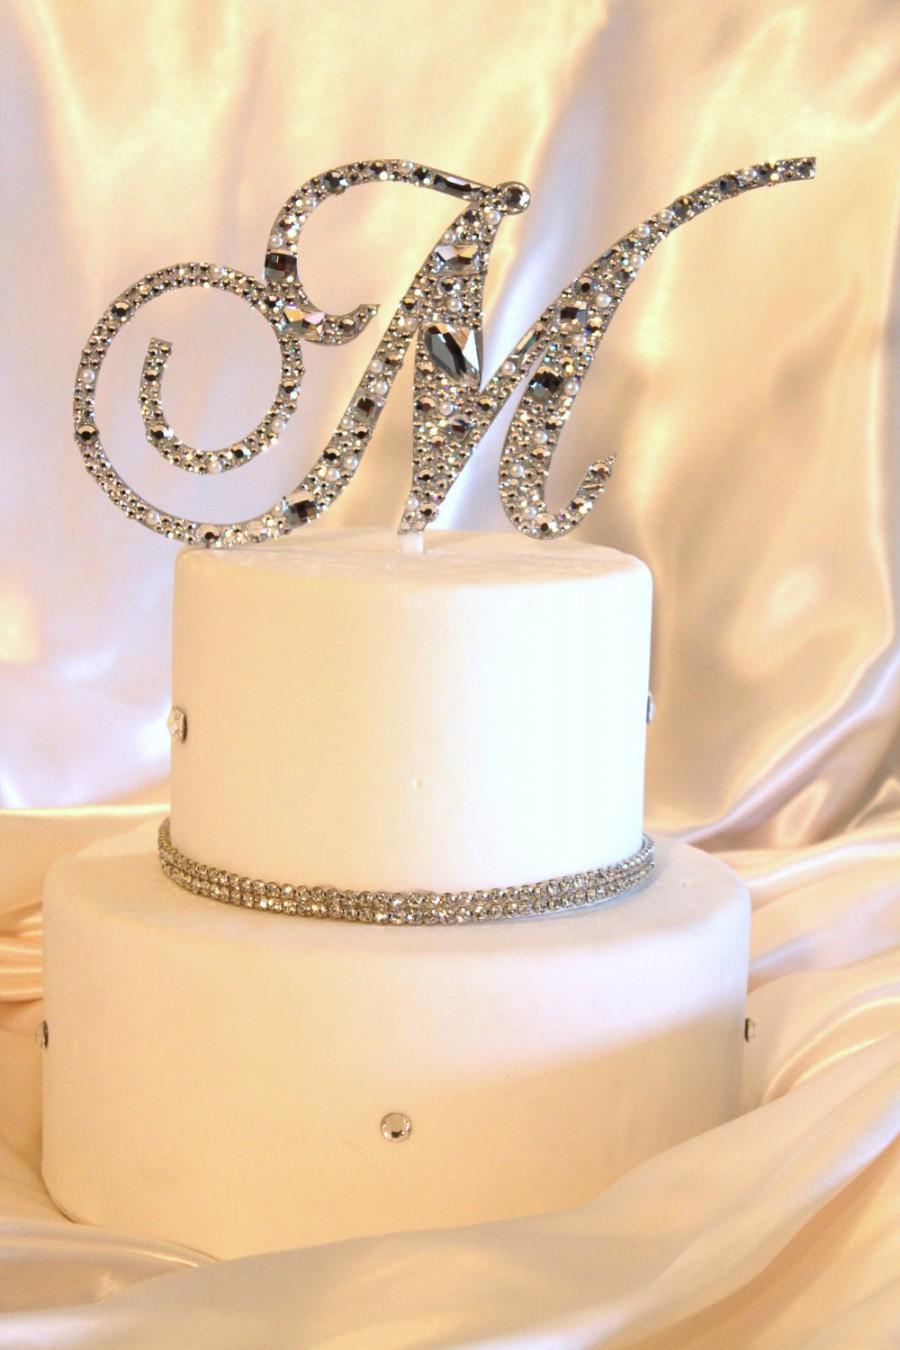 Free Shipping 3 6 Swarovski Mosaic Style Monogram Cake Topper Any Letter From The Alphabet A